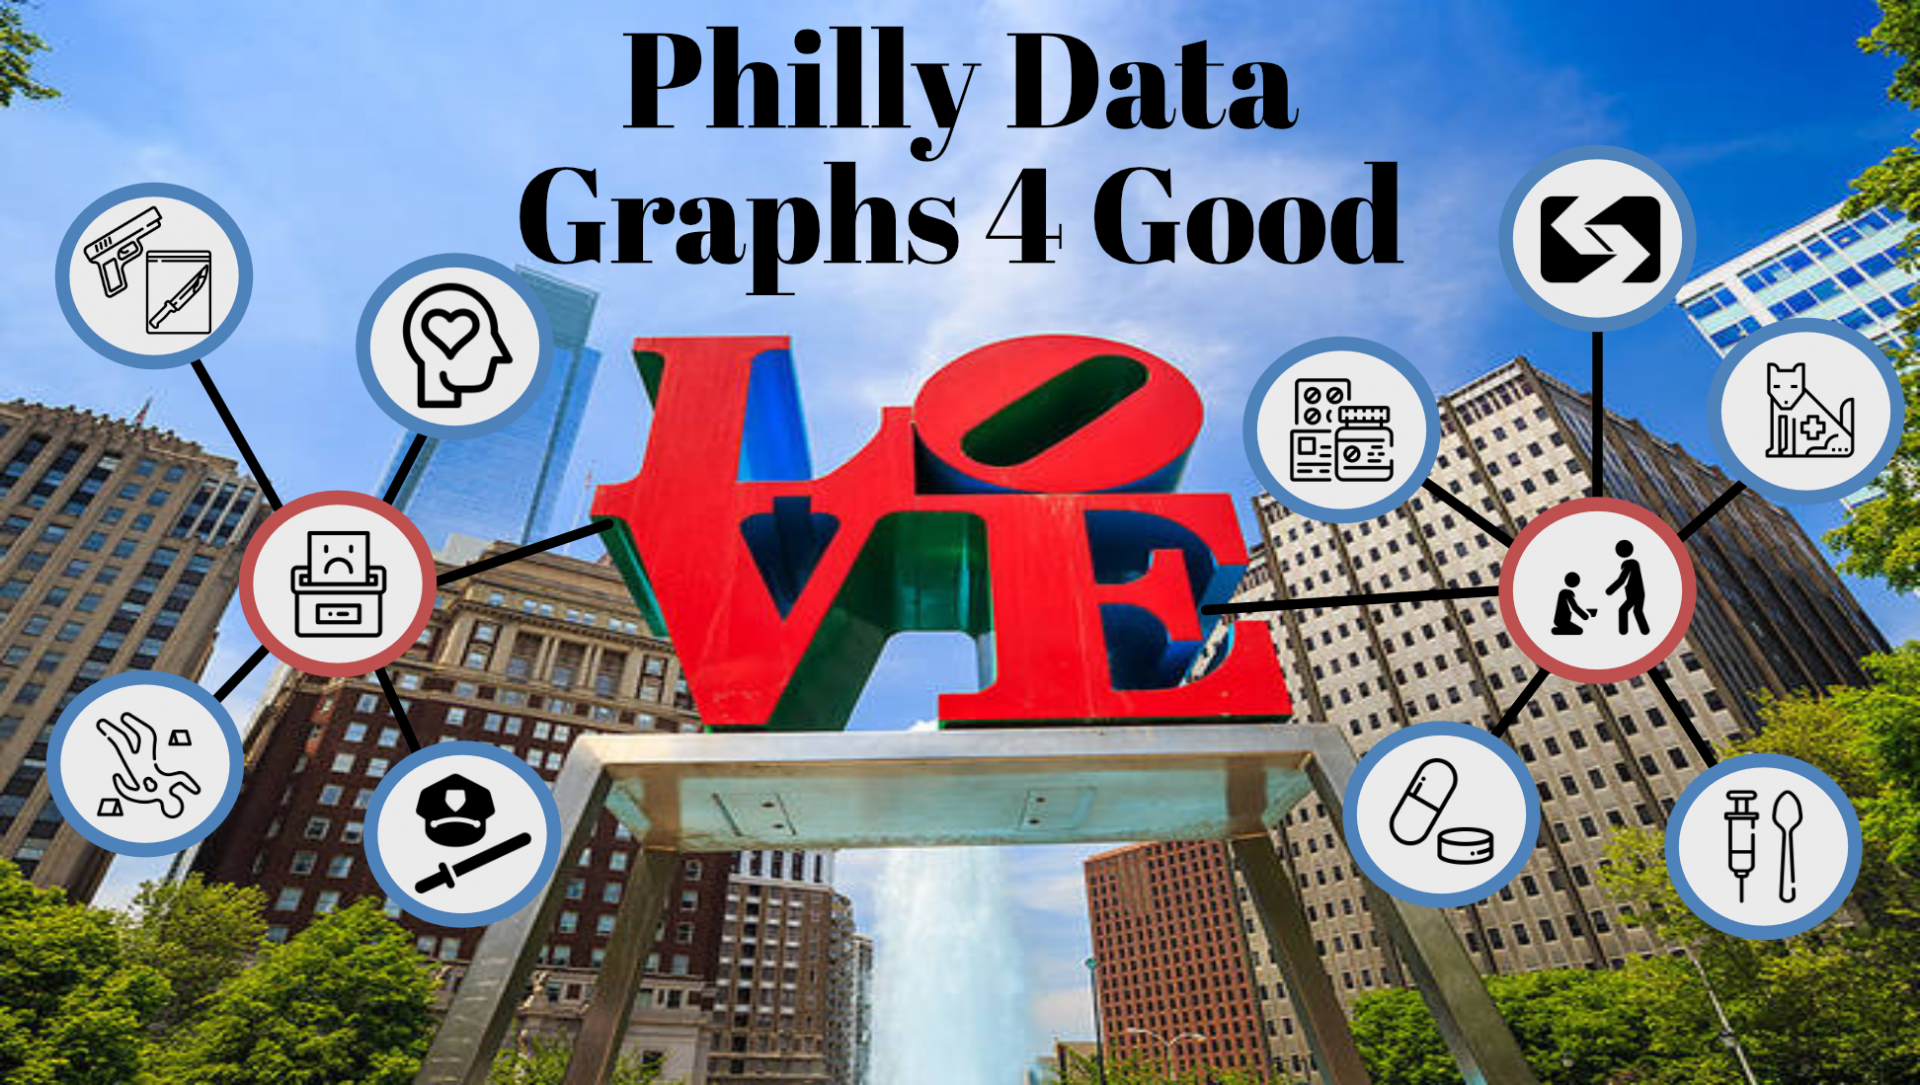 CP_Philly_Data_Graphs4Good